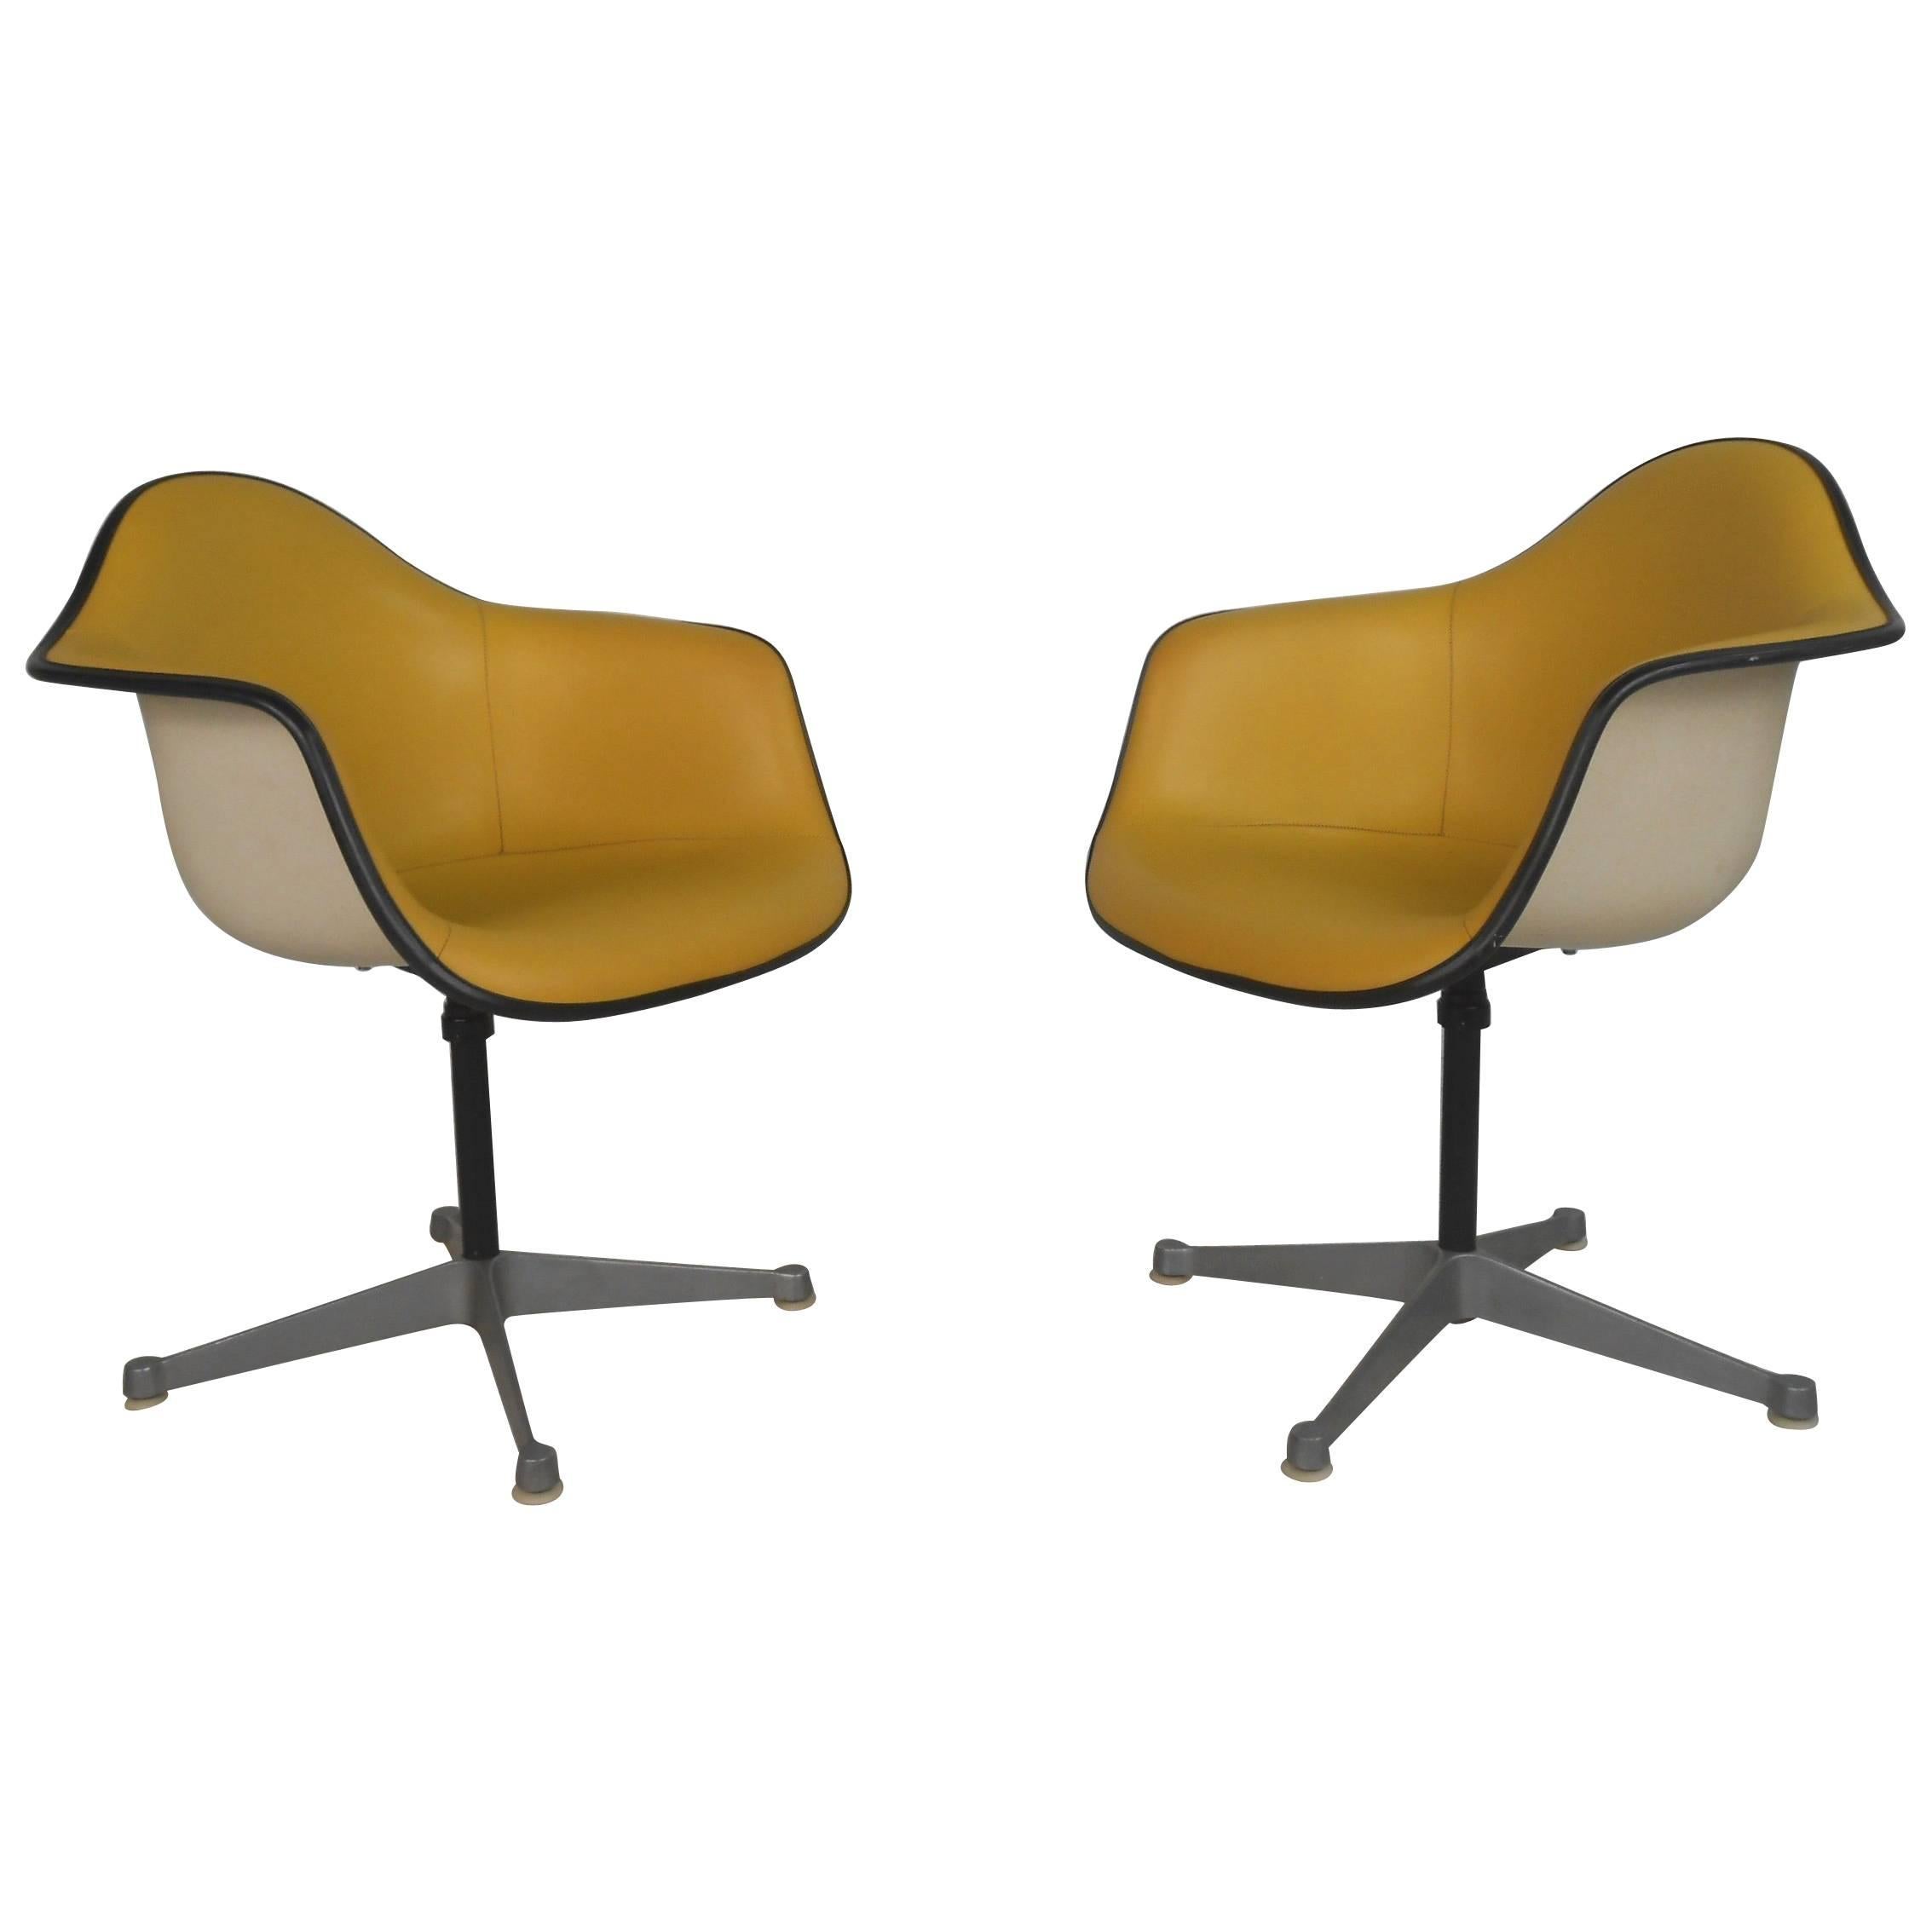 Pair of Charles Eames for Herman Miller Bucket Chairs